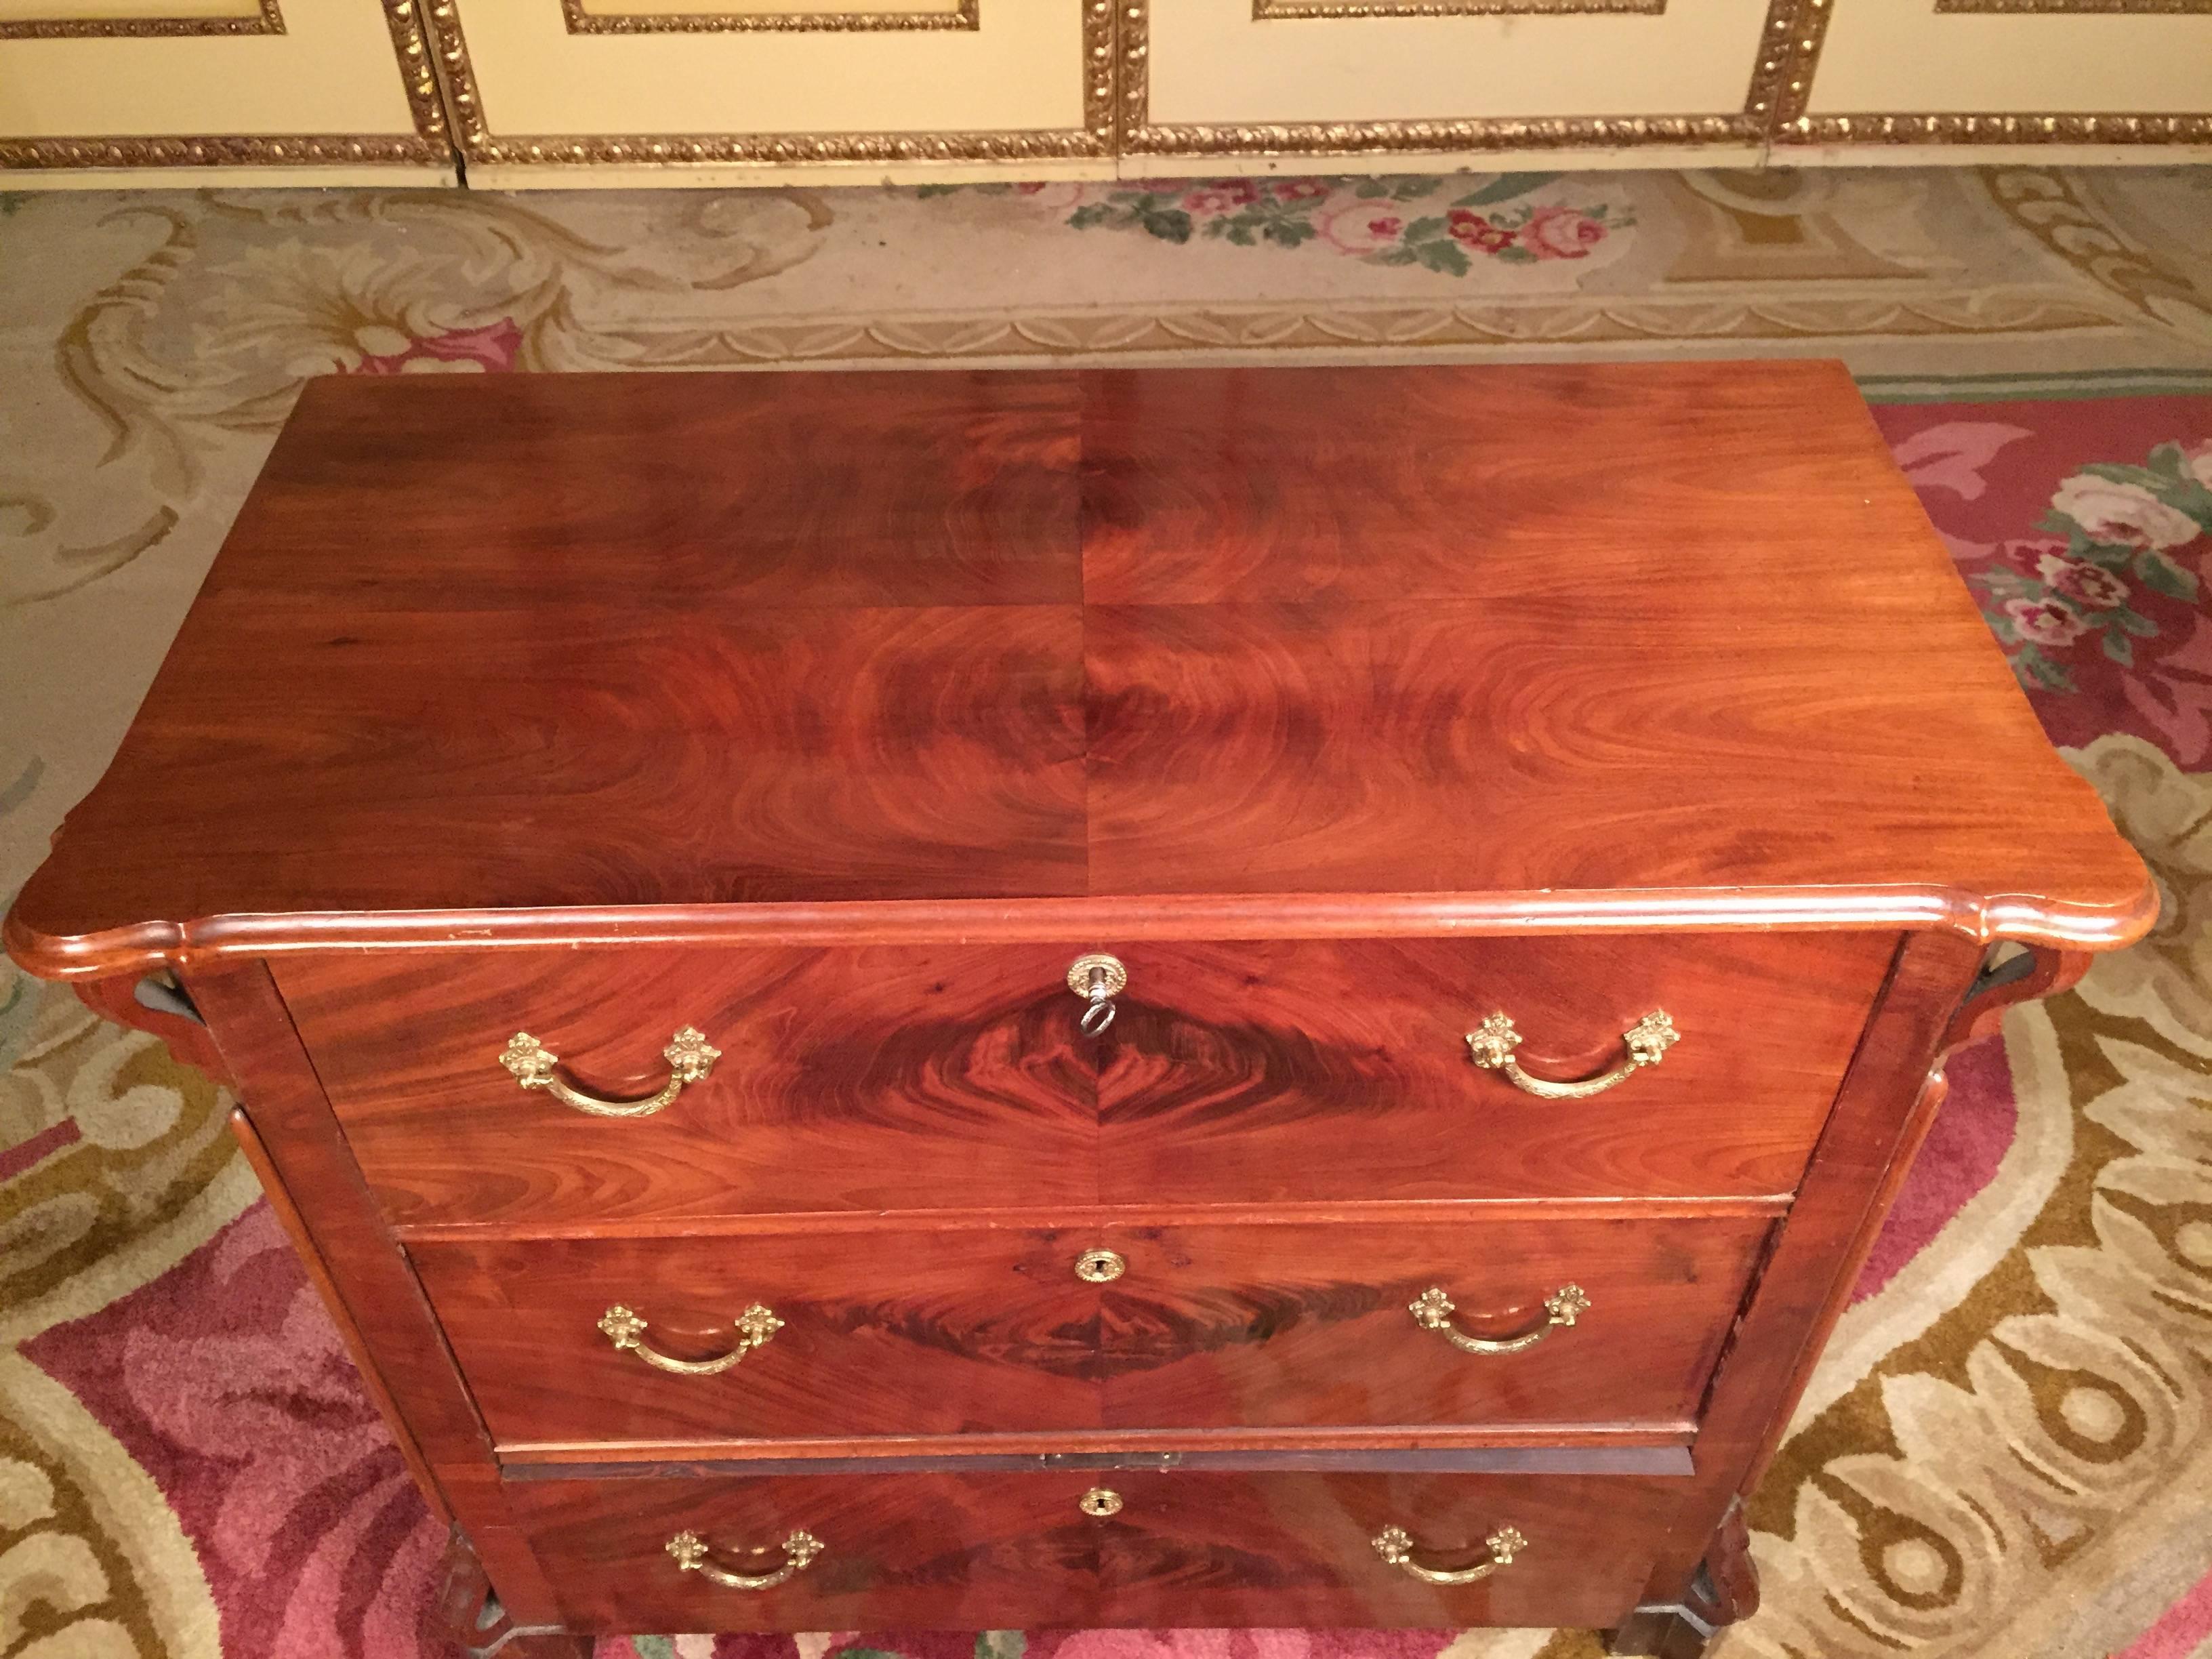 Solid wood, straight body, three drawers with two bronze handles each. Slightly overlapping profiled cover plate. Lock and key available.


(D-73)